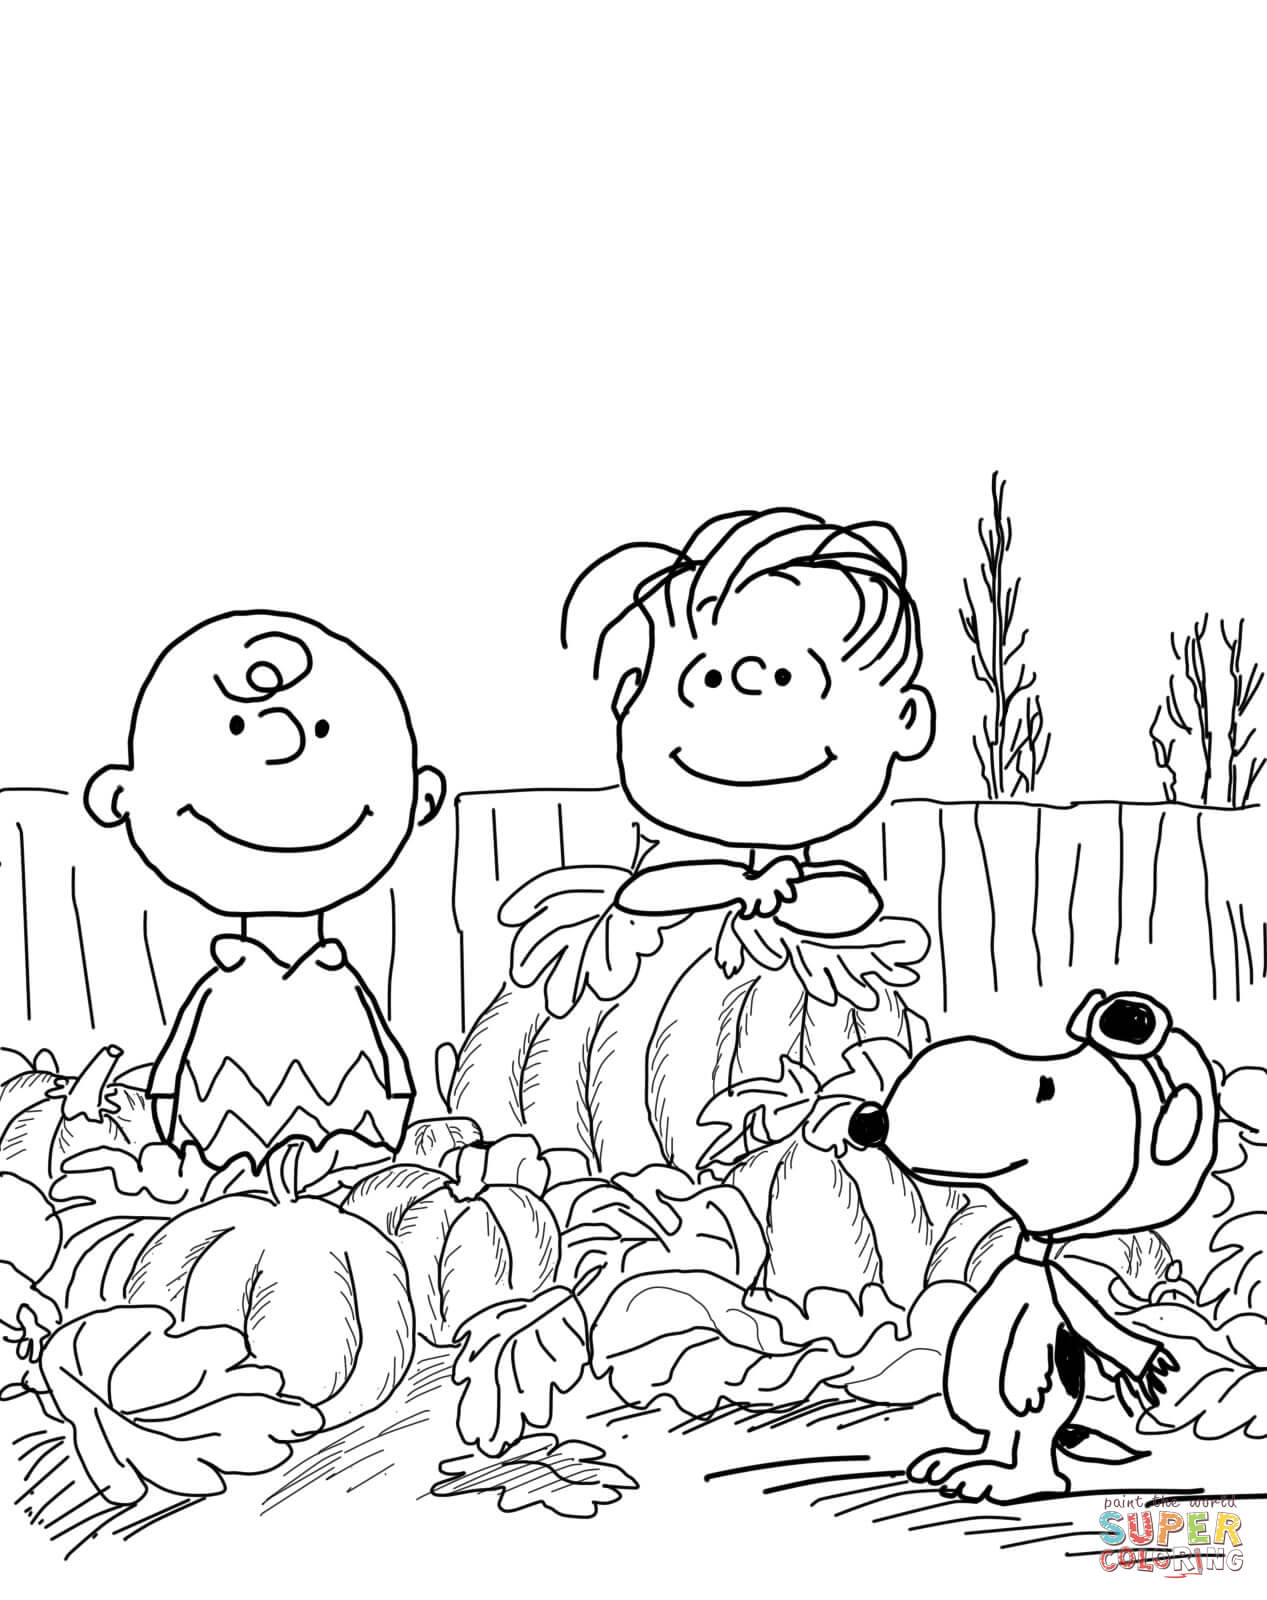 Great pumpkin charlie brown coloring page free printable coloring pages